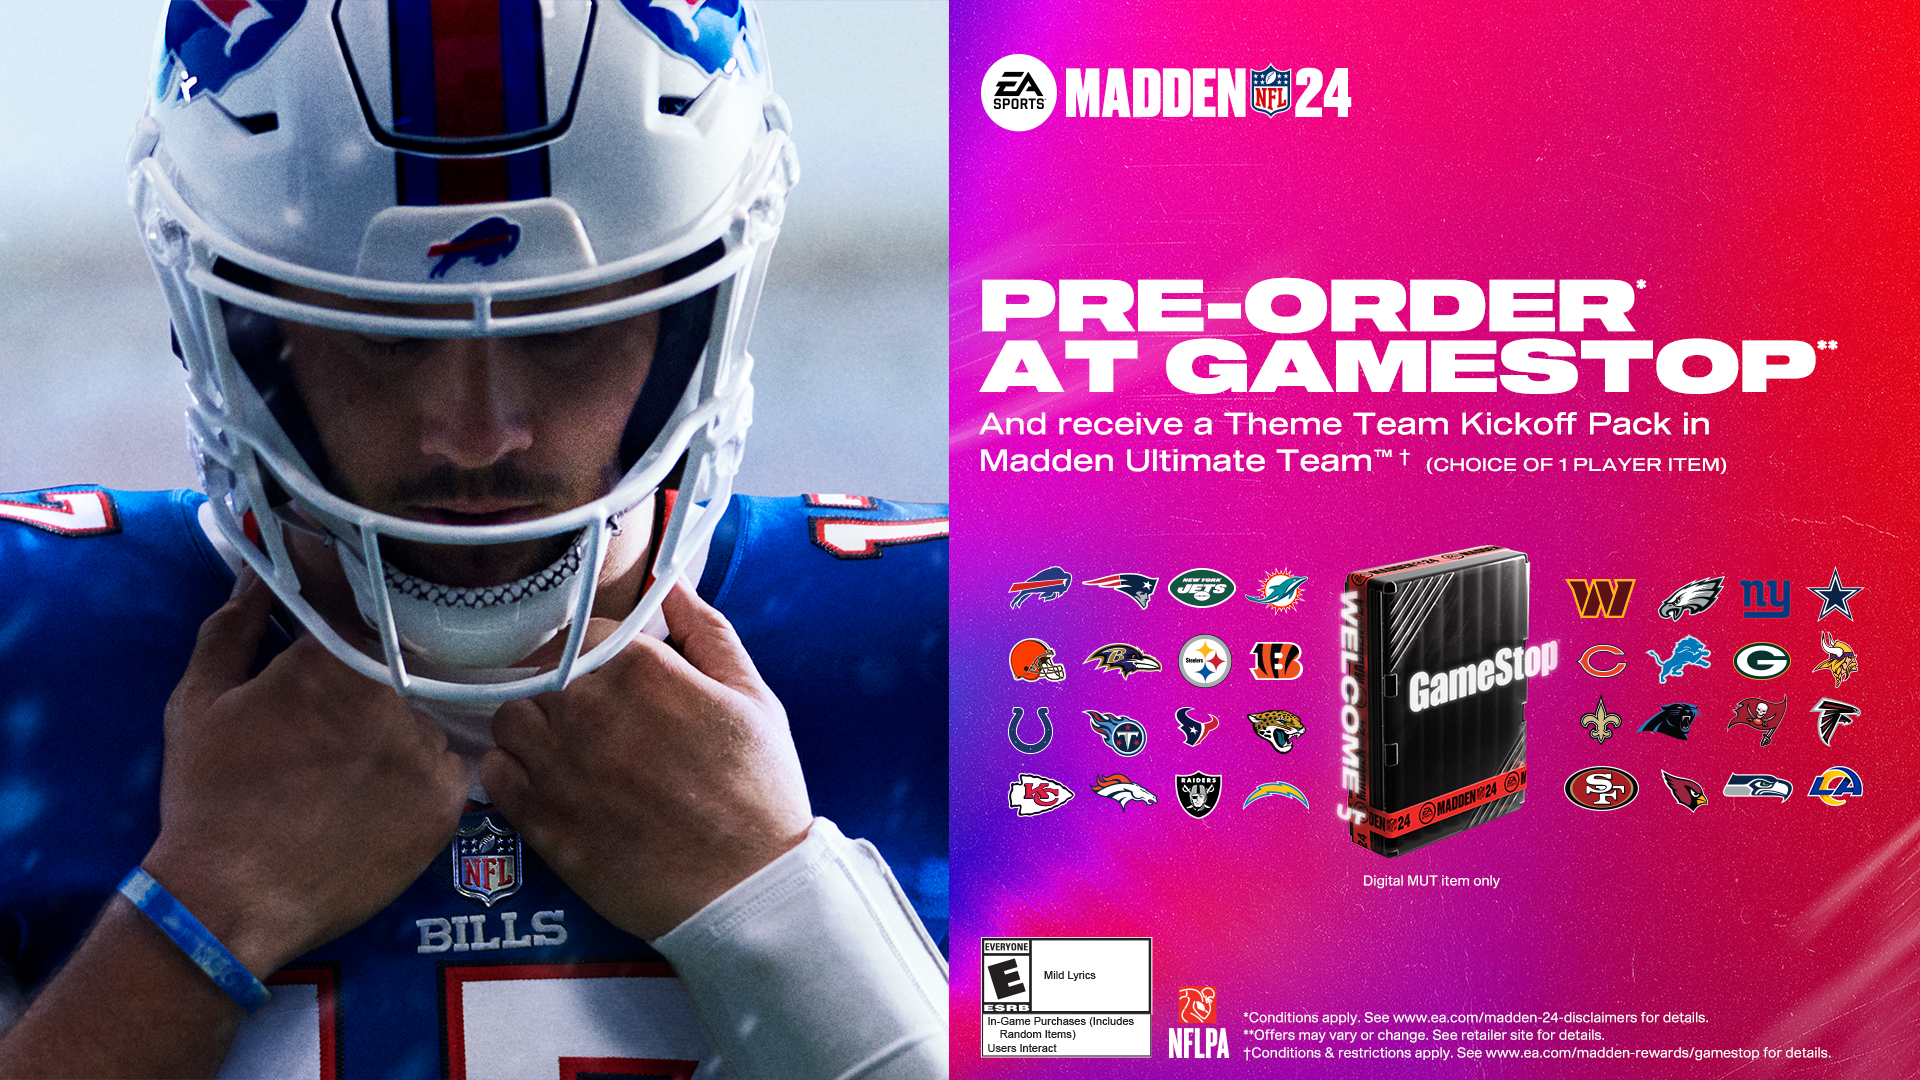 How to Get Madden 24 Early Access